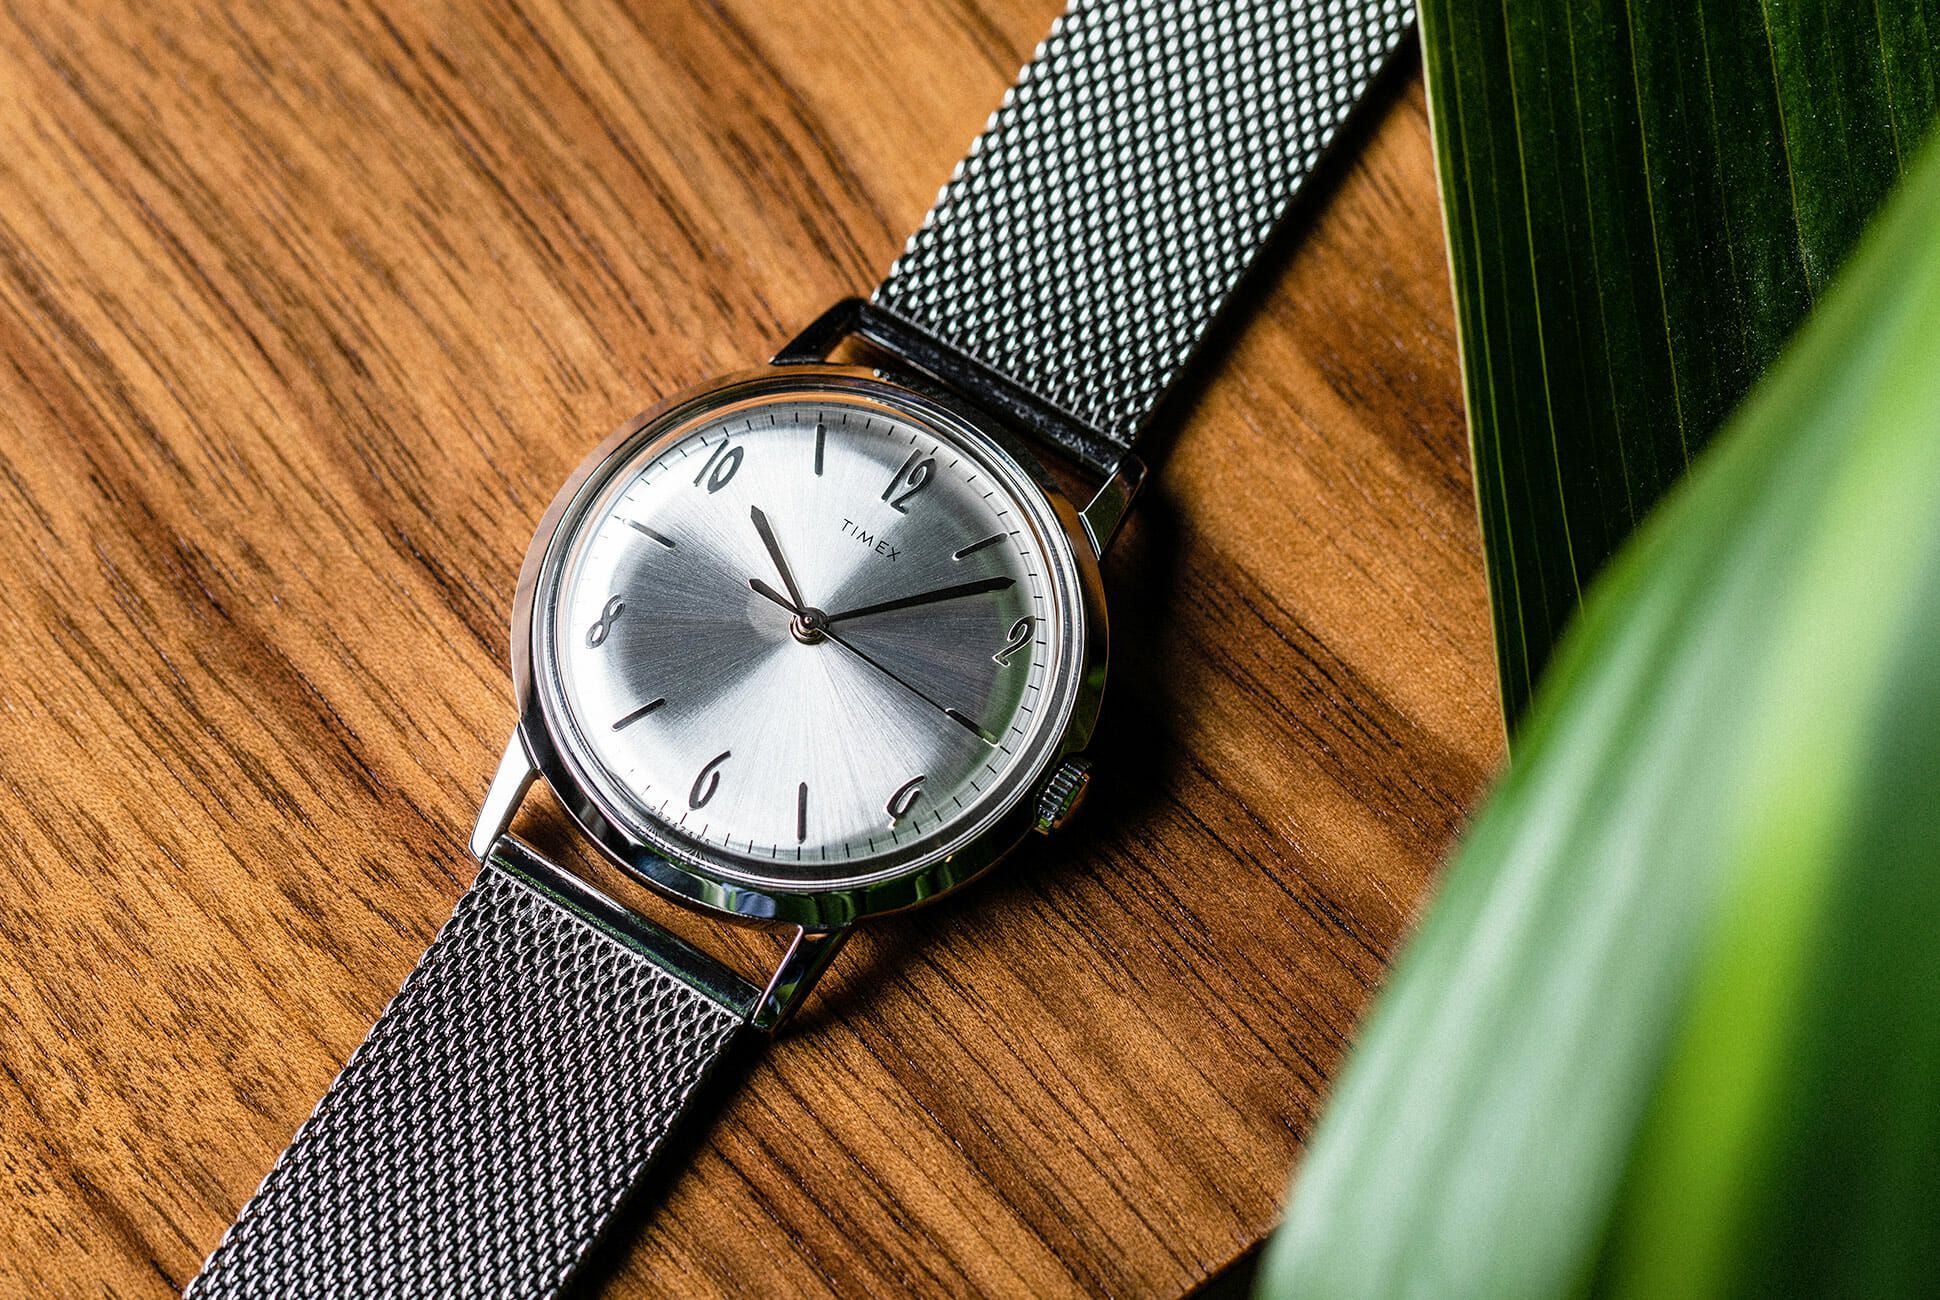 The New Marlin Mesh is the Most Versatile Timex Marlin Yet